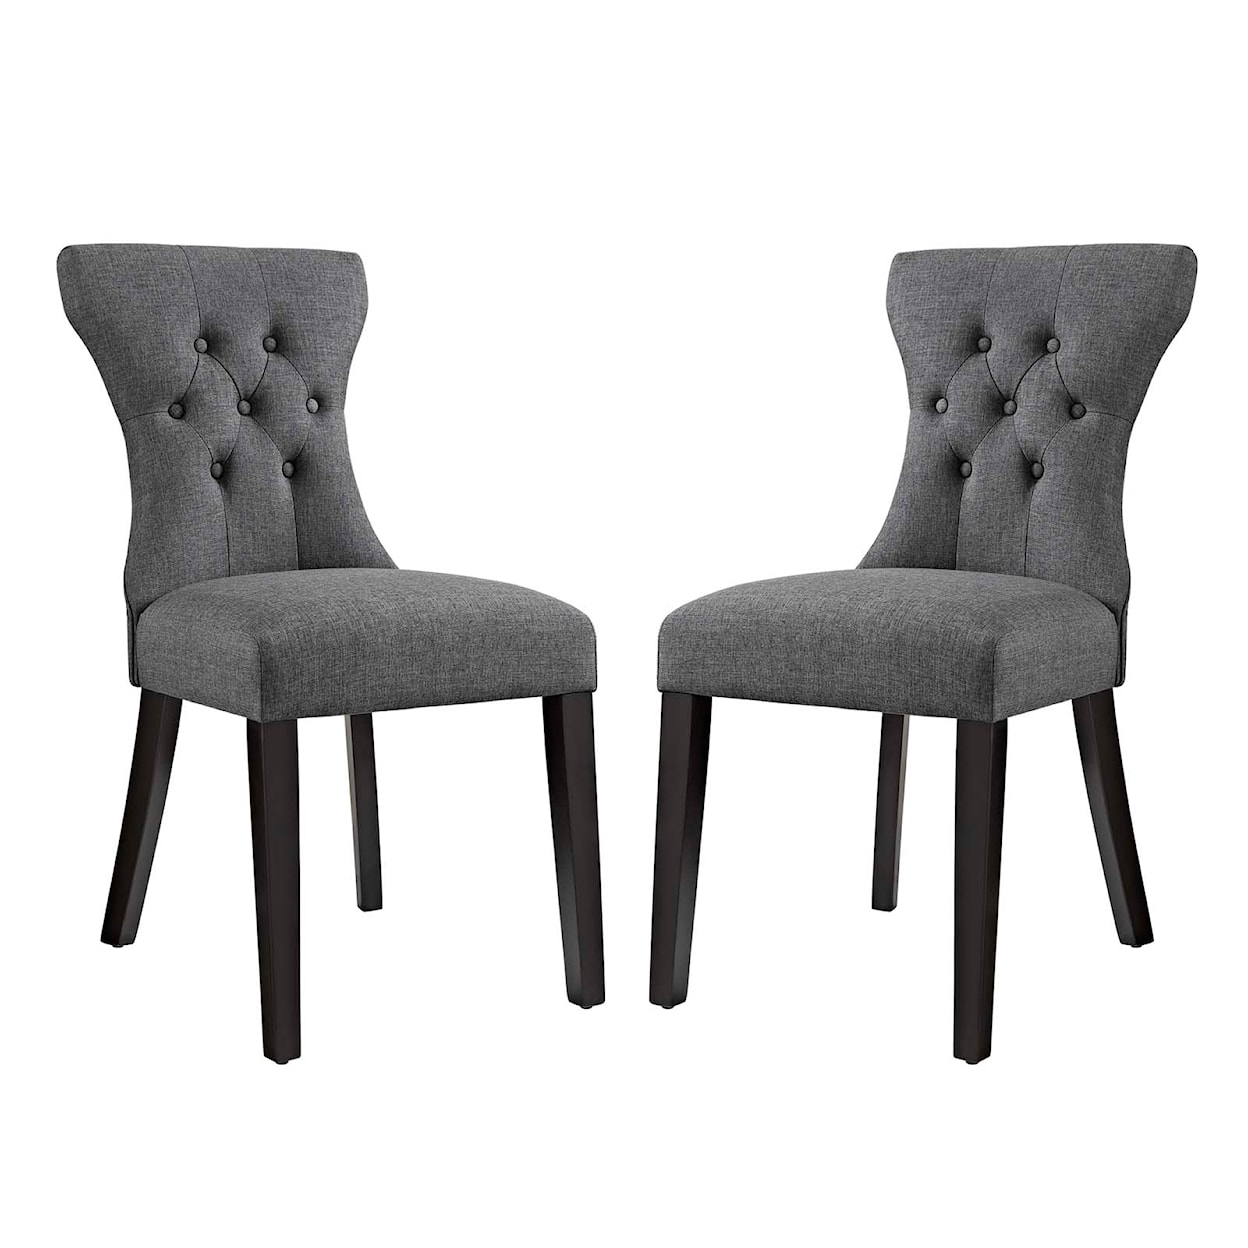 Modway Silhouette Dining Side Chairs